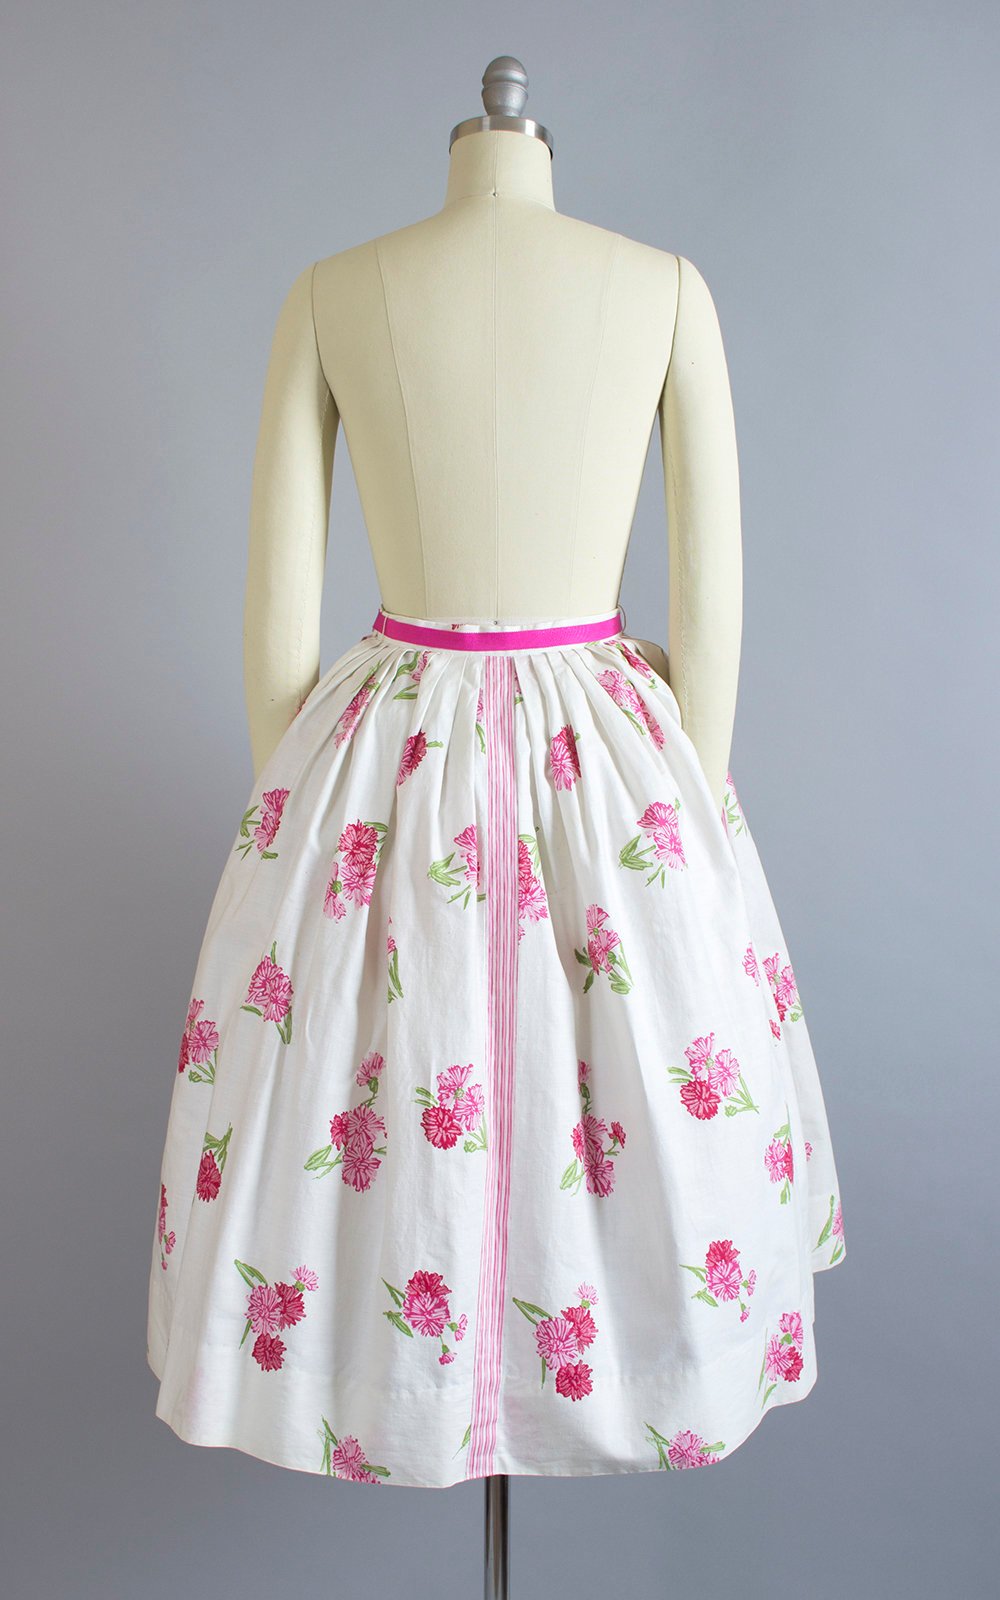 Vintage 1950s Skirt | 50s Floral Striped Printed Cotton White Pink Full Swing Skirt (xs/small)